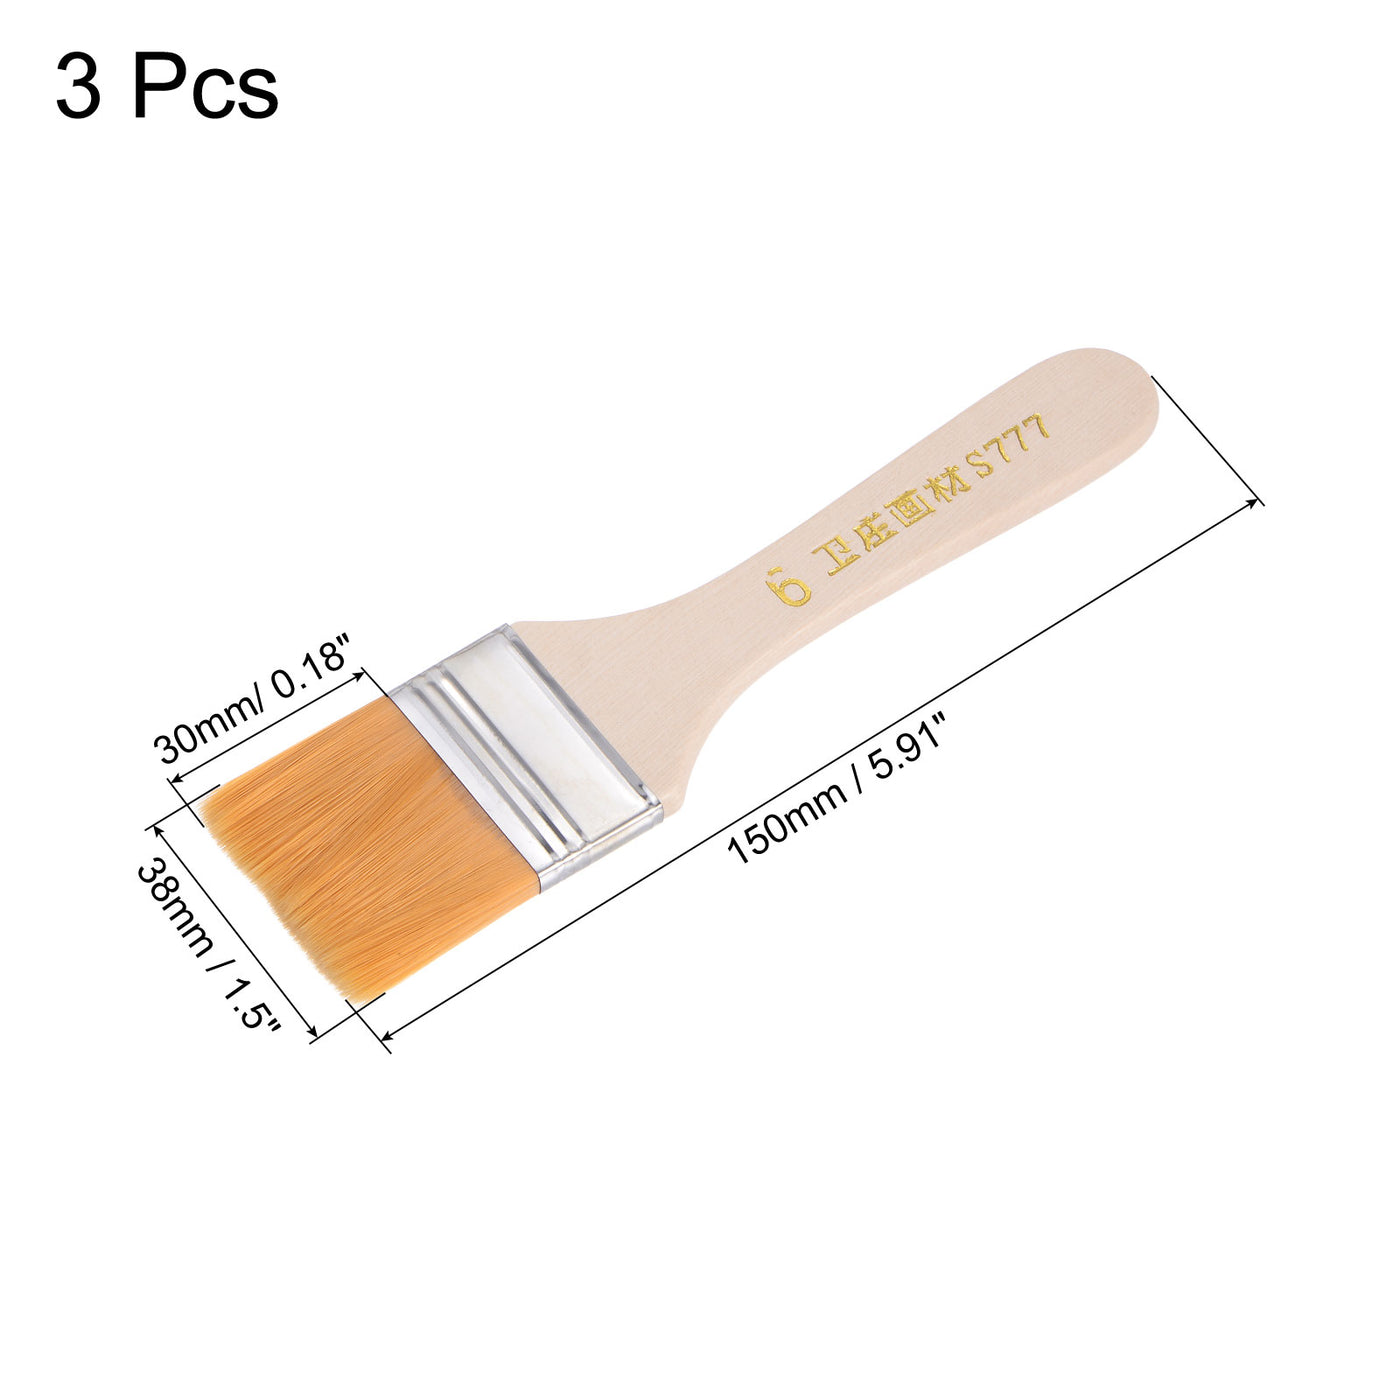 uxcell Uxcell 1.5" Width Small Paint Brush Nylon Bristle with Wood Handle Painting Tool 3Pcs